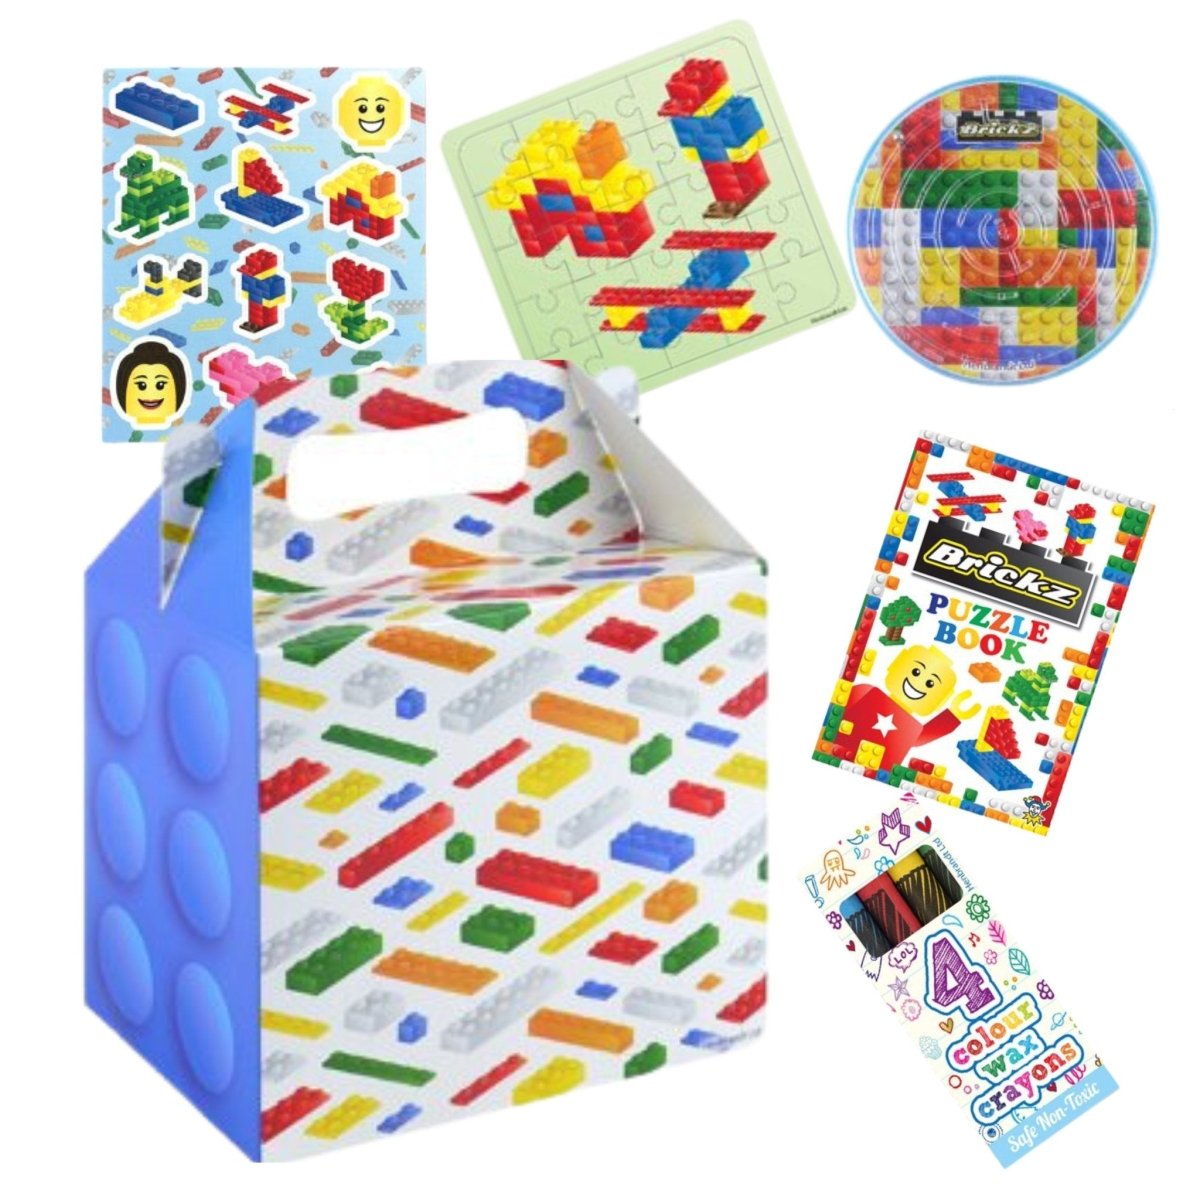 Brickz Pre-Filled Party Food Boxes - Kids Party Craft